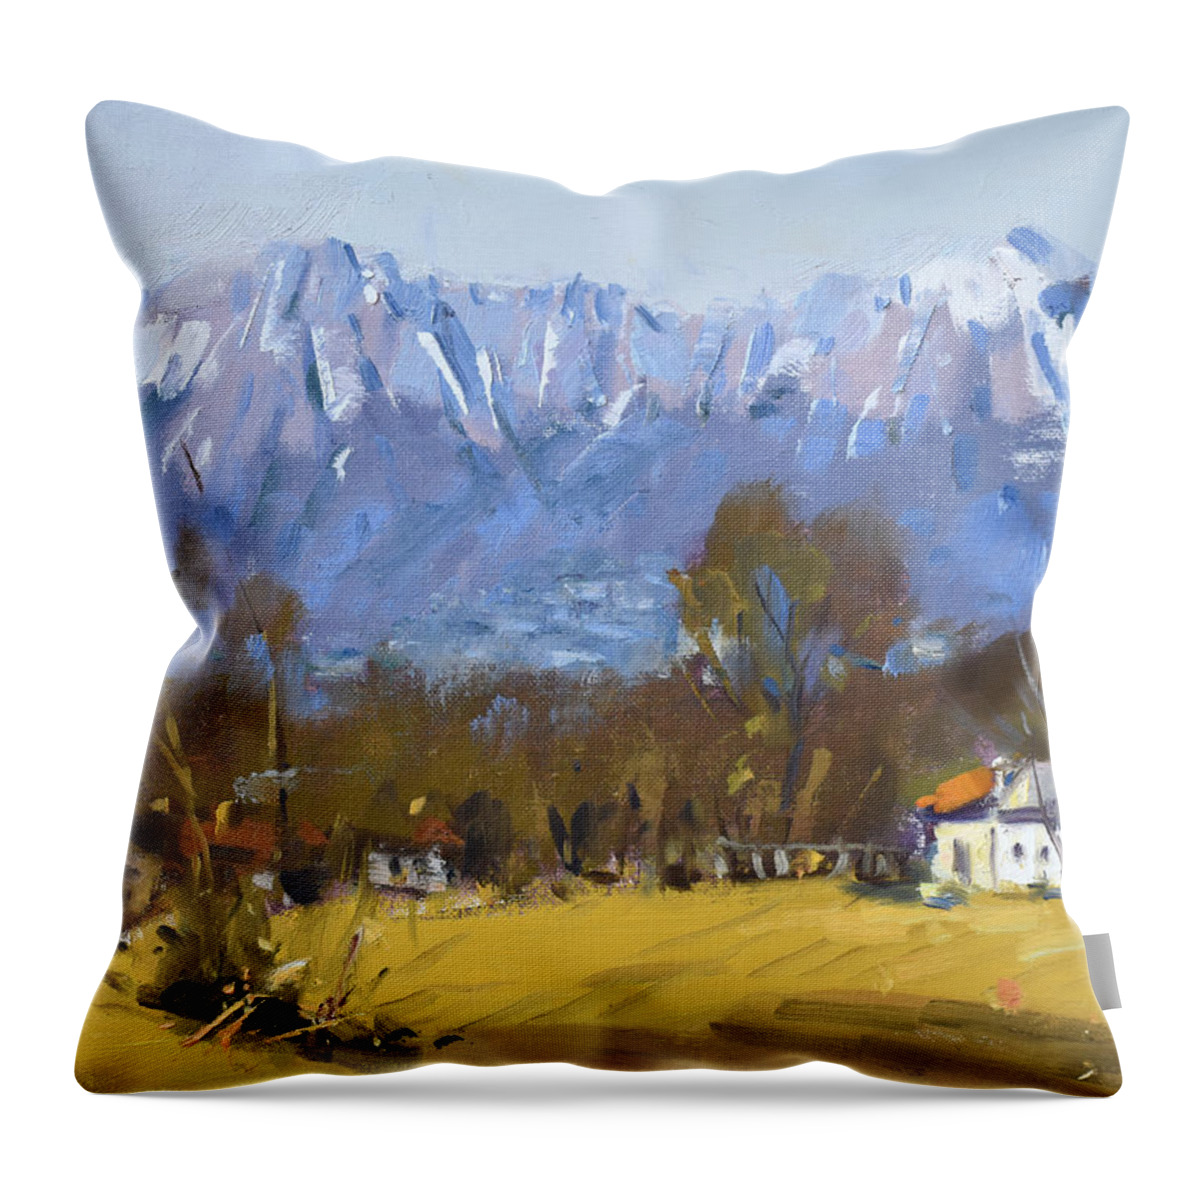 The Dolomites Throw Pillow featuring the painting The Dolomites by Ylli Haruni